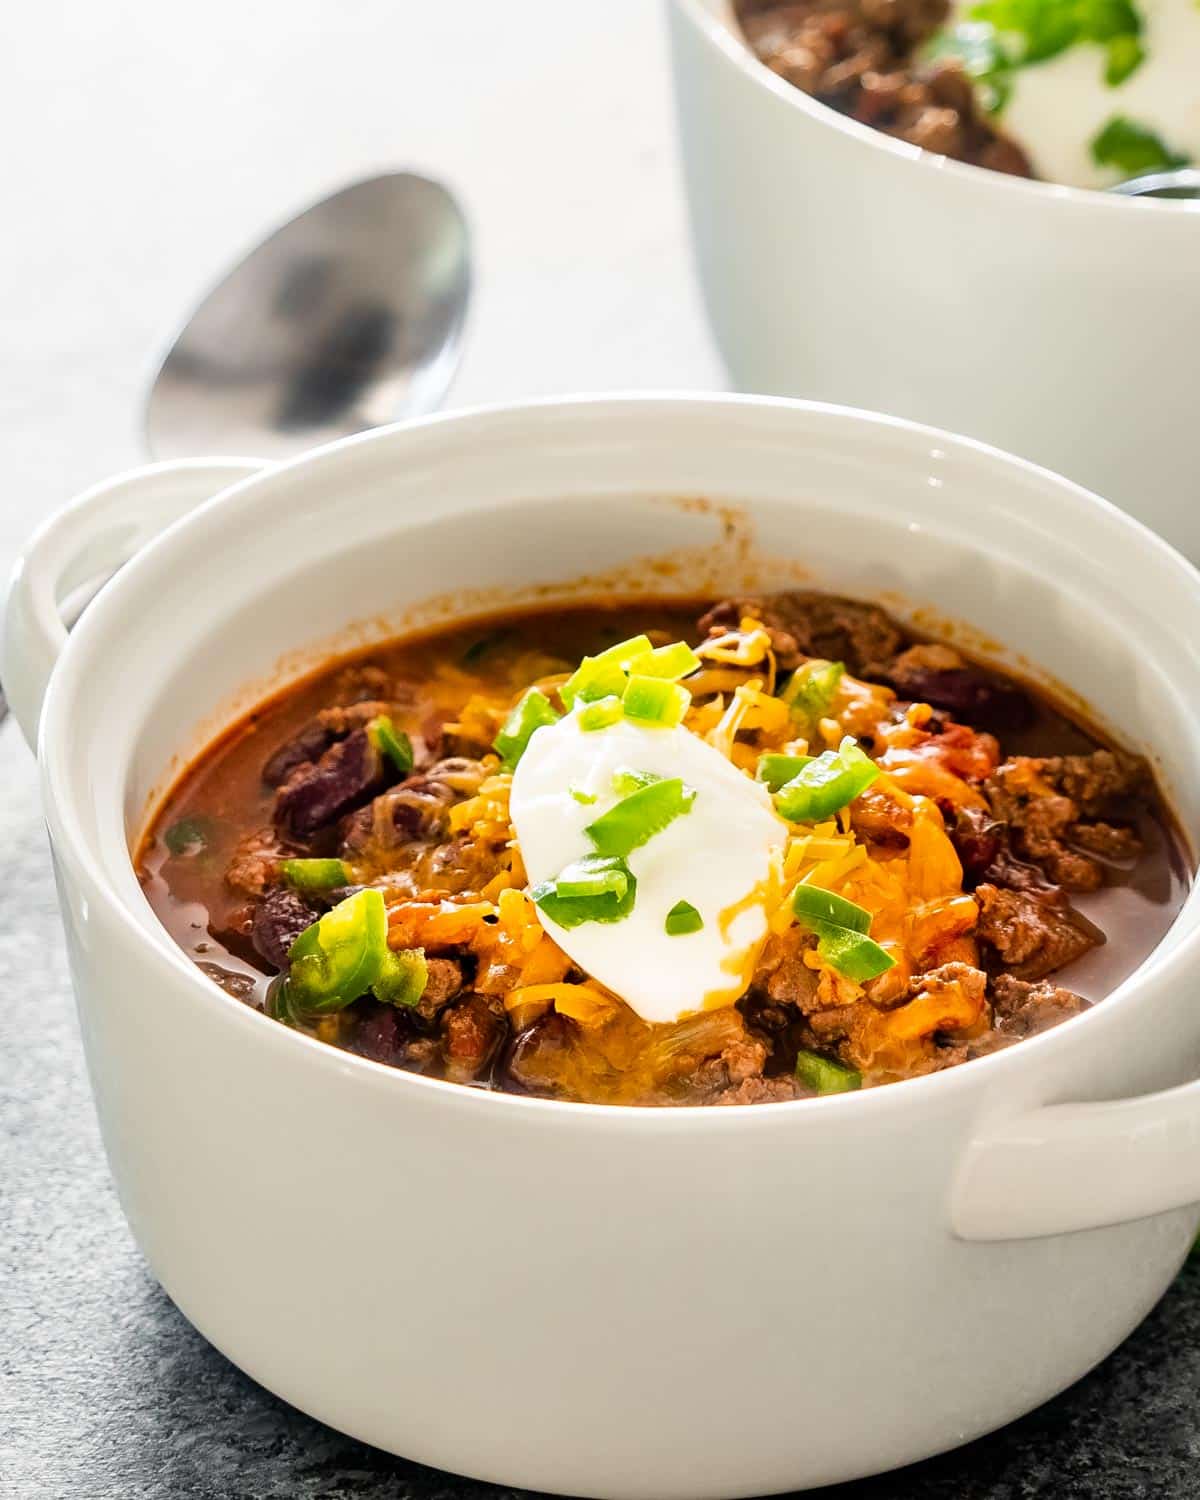 chili in a bowl topped with cheddar cheese and sour cream.